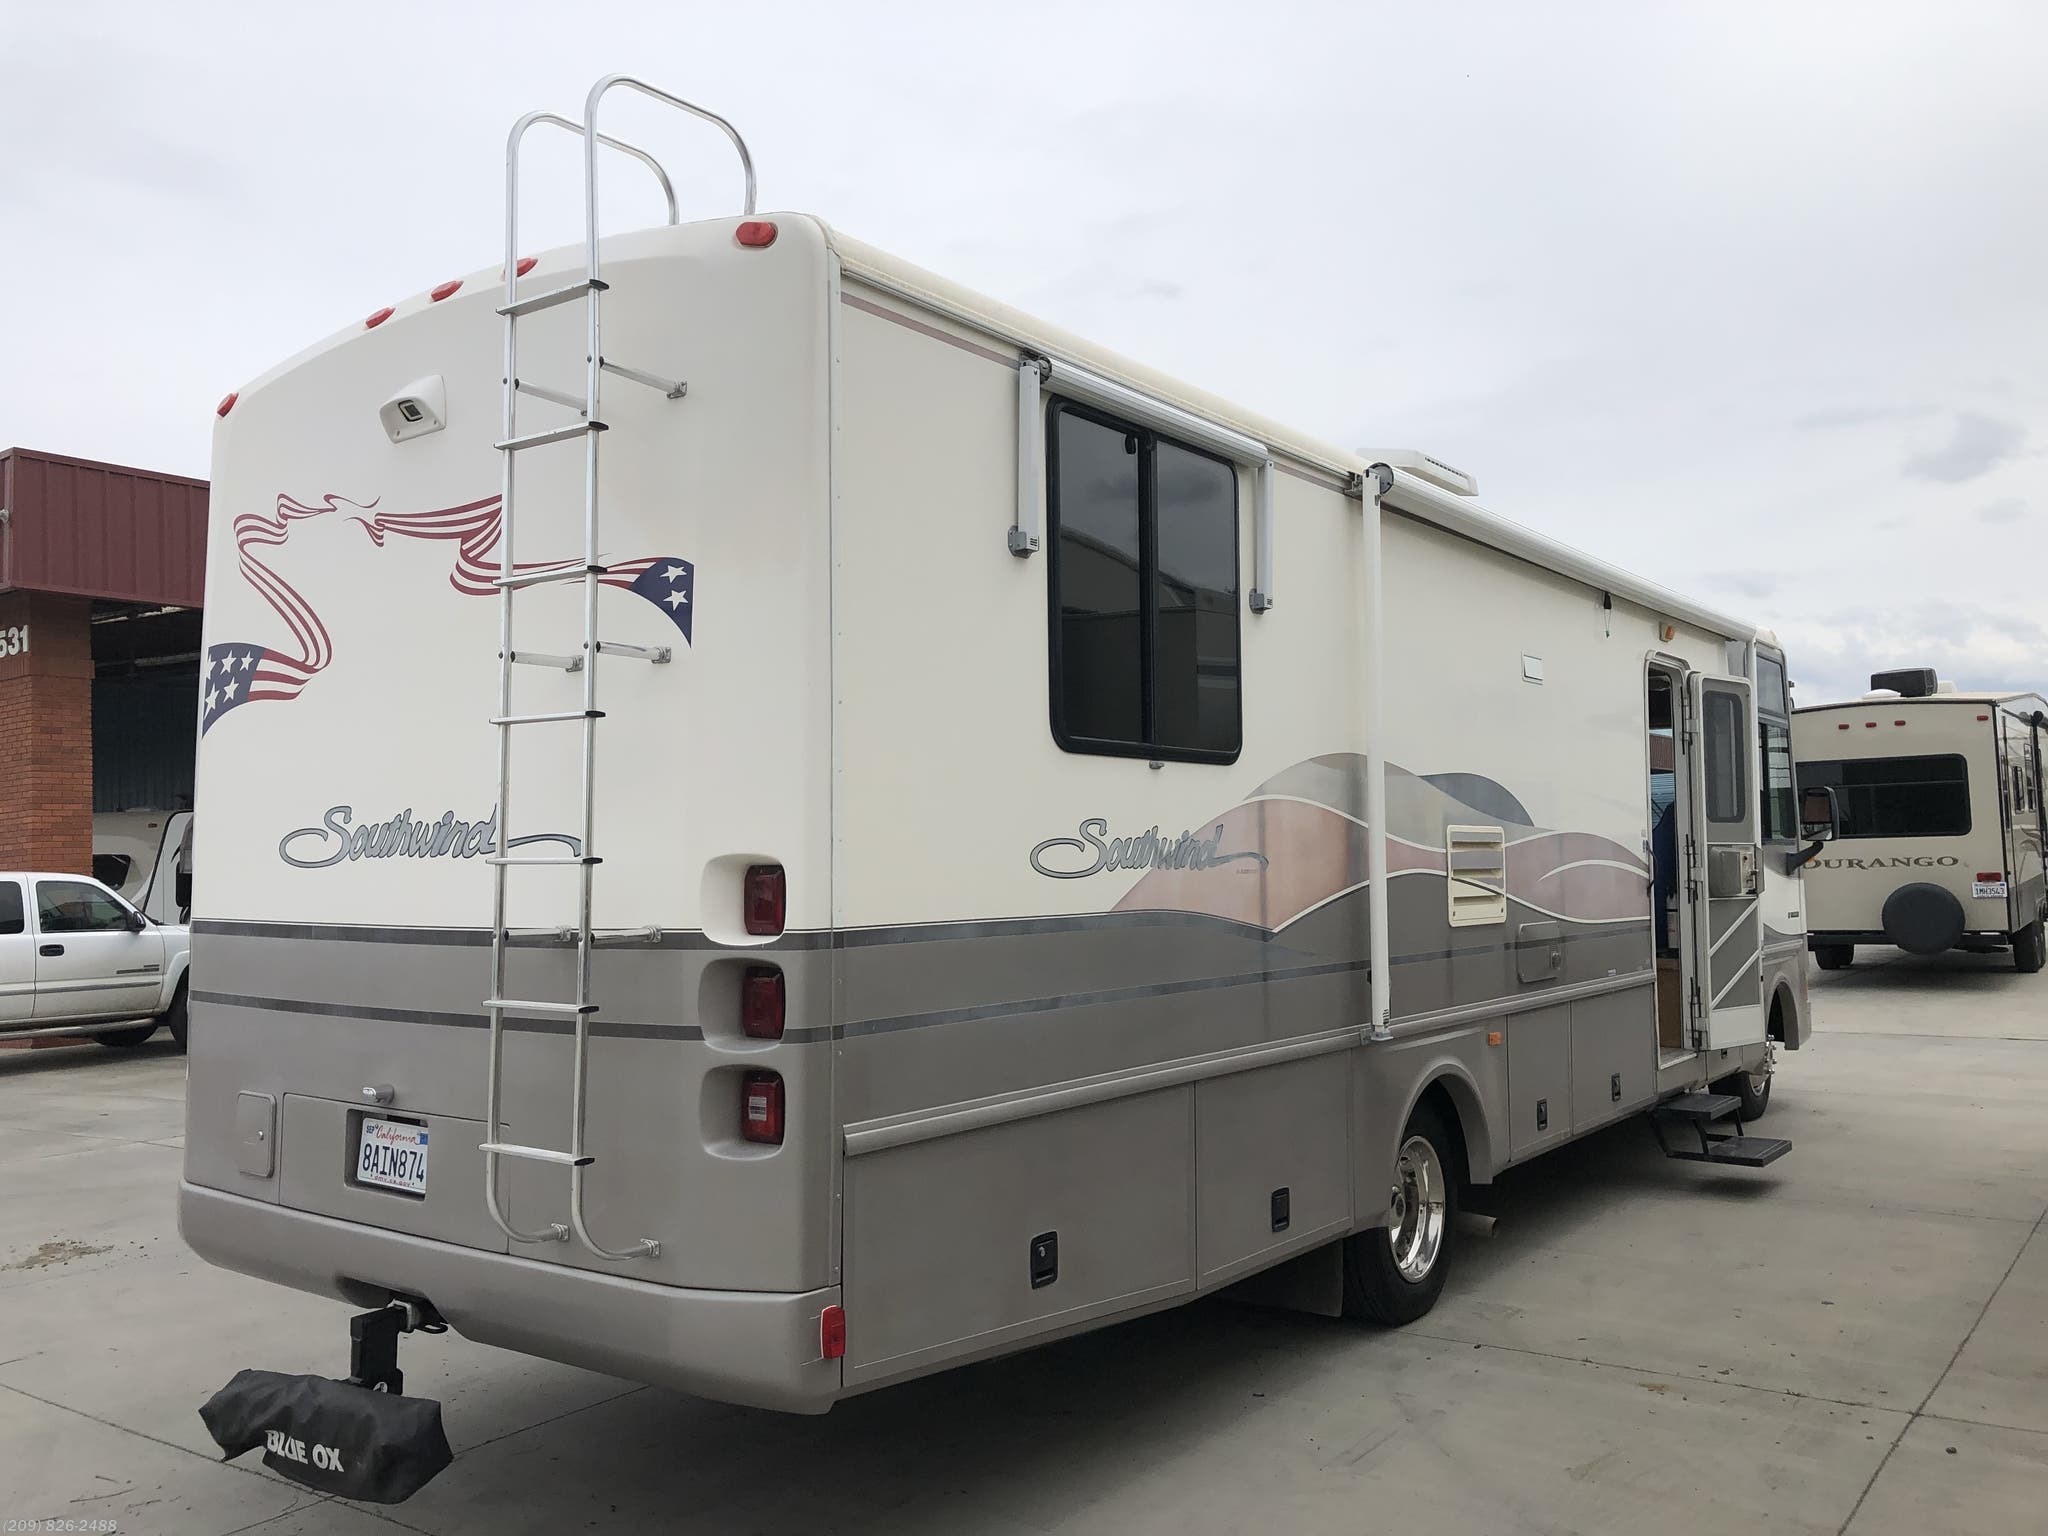 1999 Fleetwood RV Southwind 32V for Sale in Los Banos, CA 93635 | 3175x 1999 Fleetwood Southwind 32v For Sale